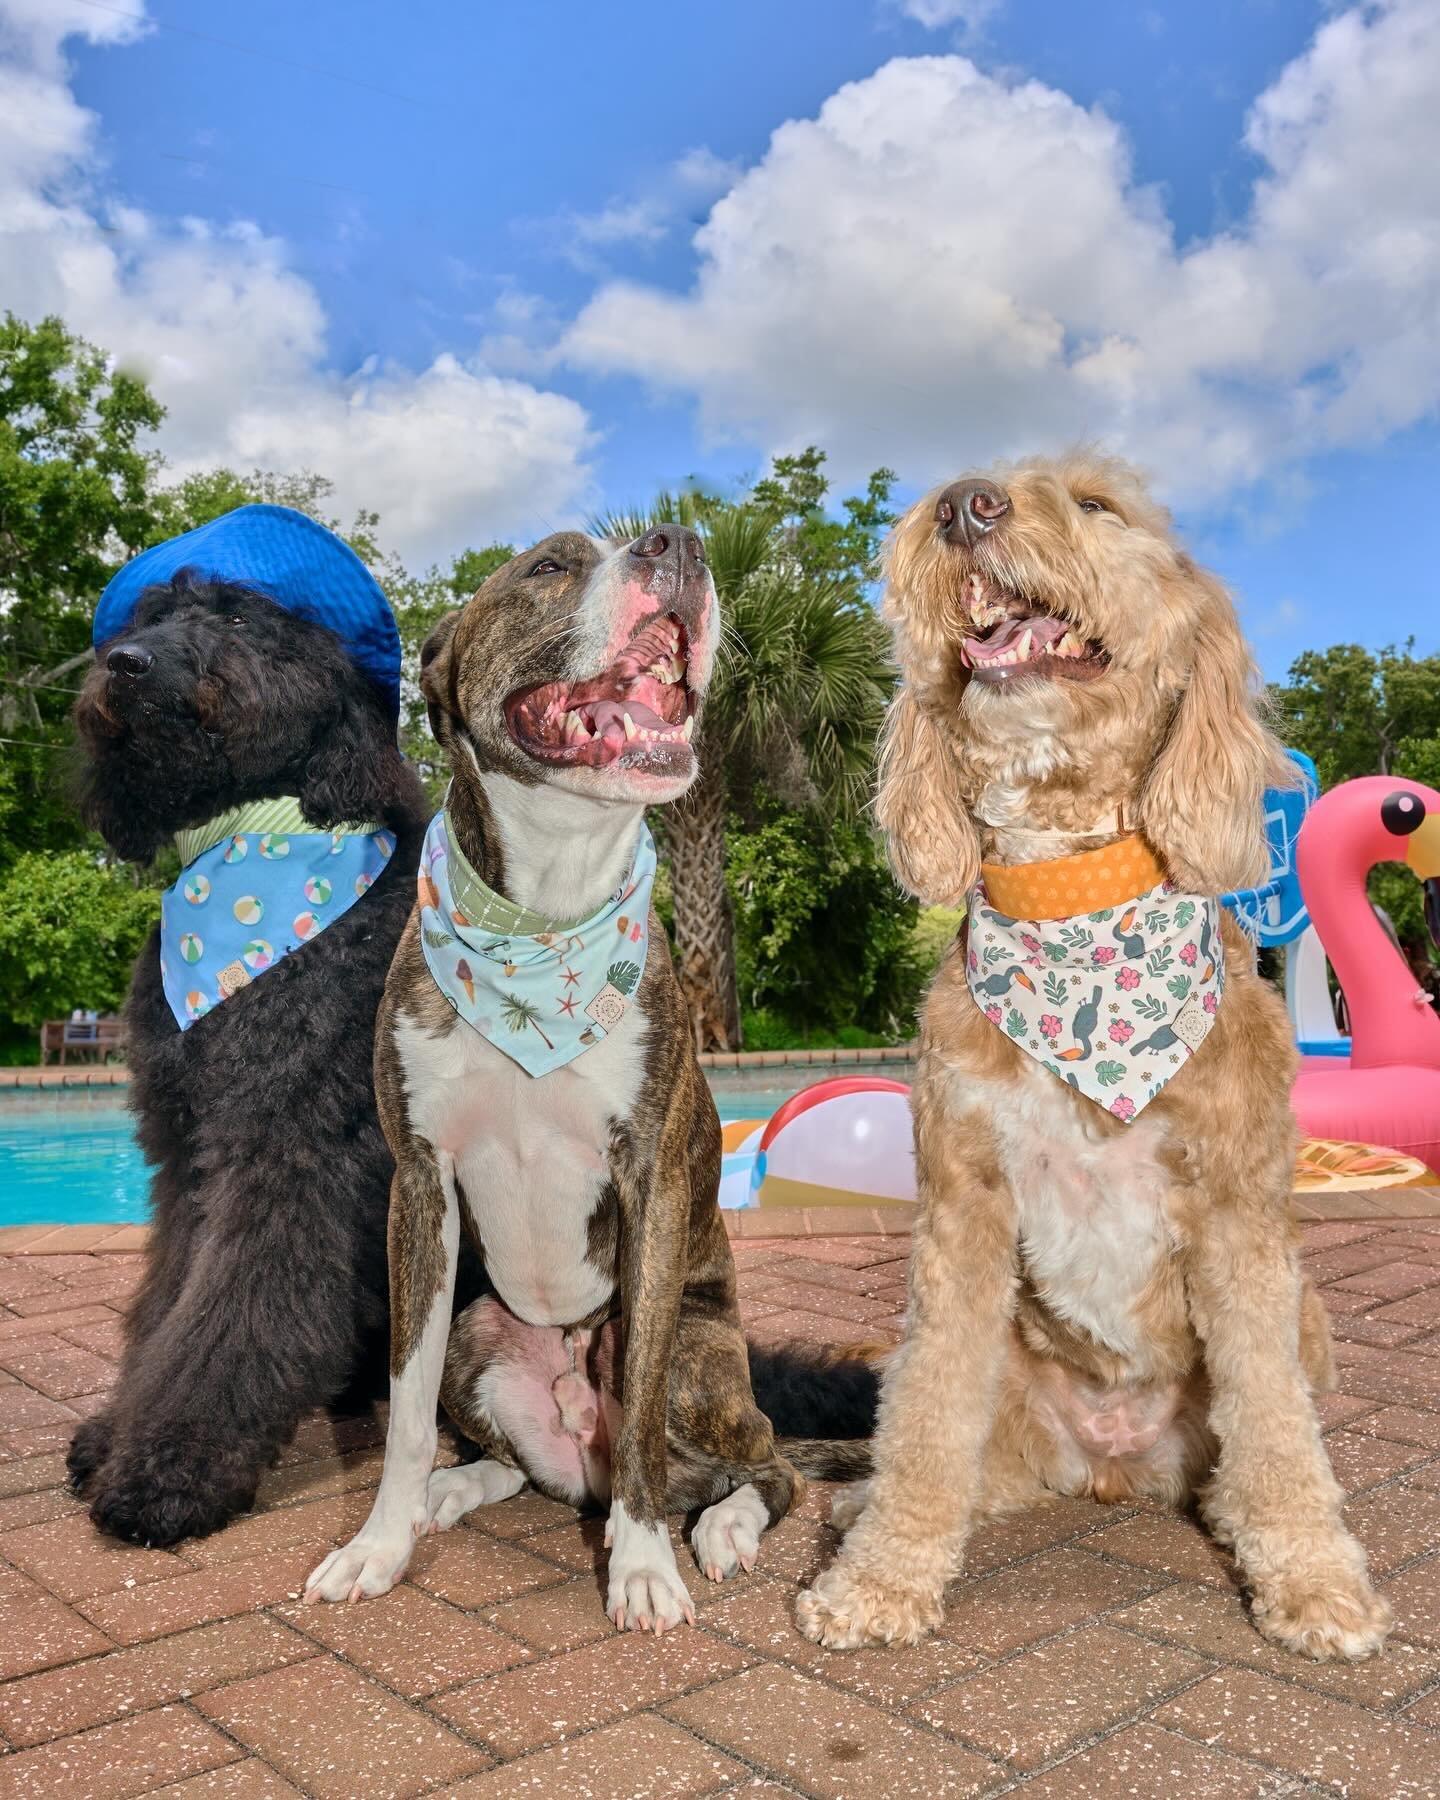 Summer collection is now LIVE! 🎉 
6 new reversible bandanas + the cutest waste bag holder! 🌊

🔗 Peiandthreads.com or click the link in bio 
.
.
.
#peiandthreads #dogfashion #dogsummer #dogbandanas